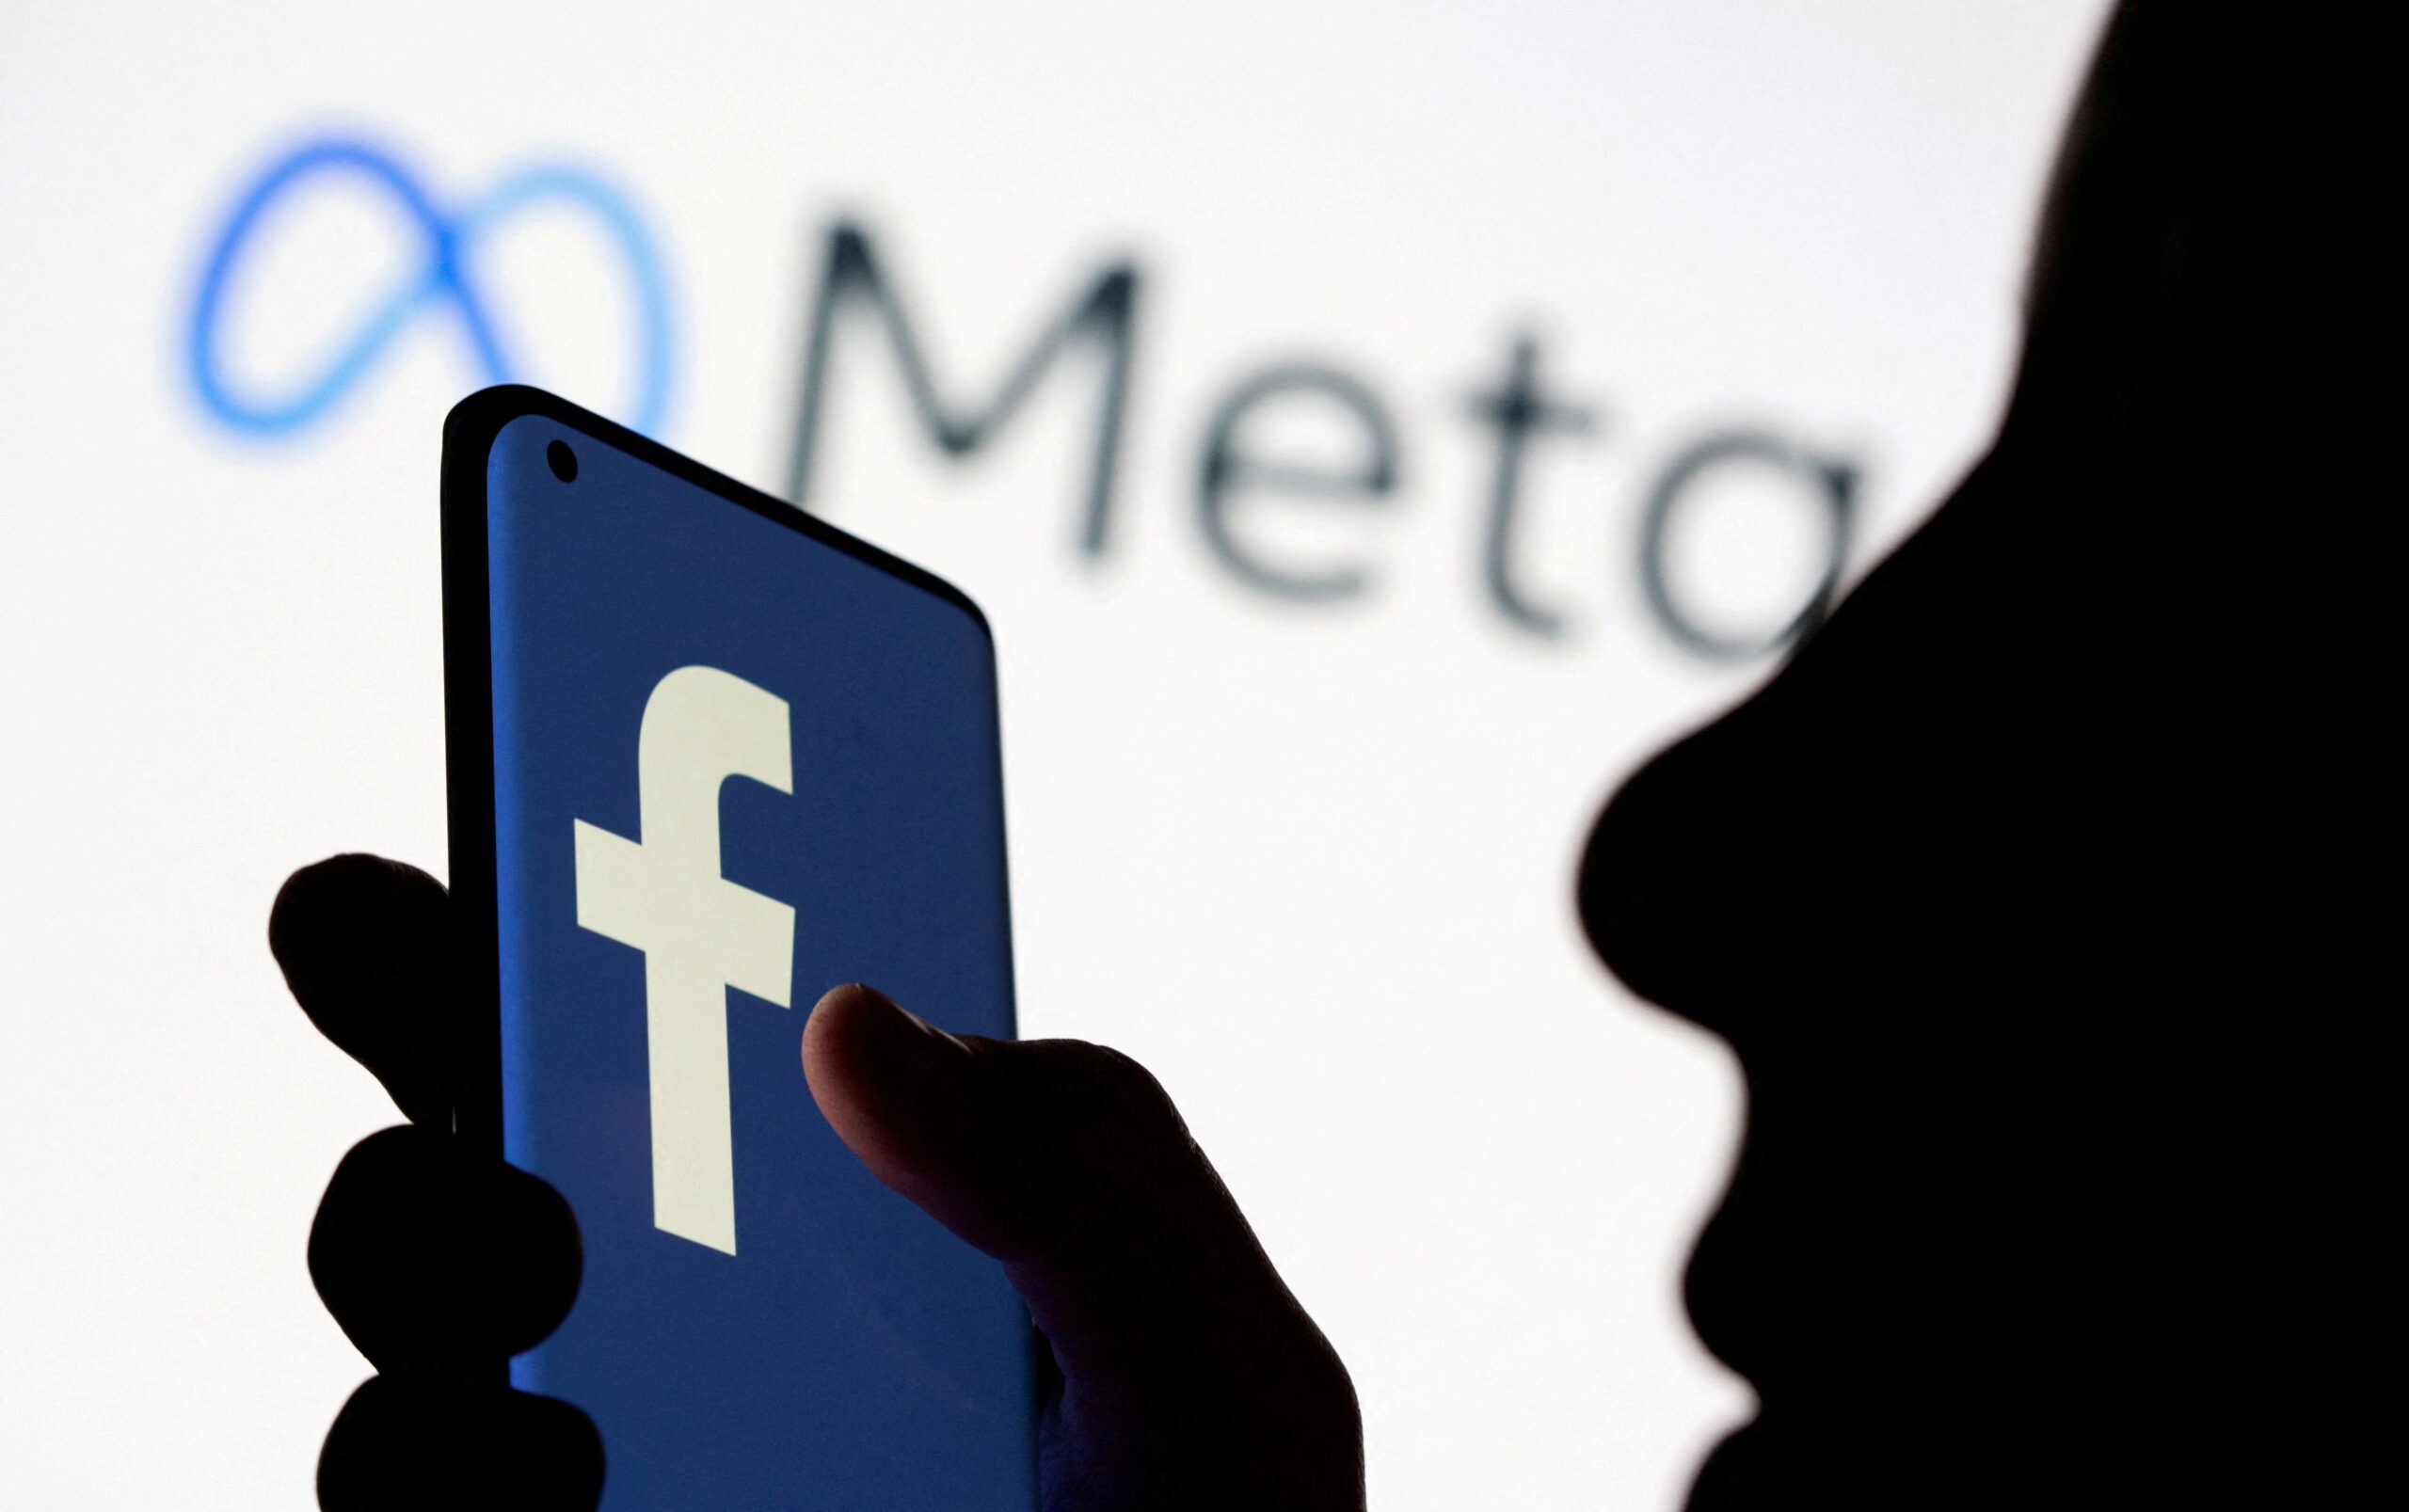 Facebook owner is behind $60-M deal for Meta name rights